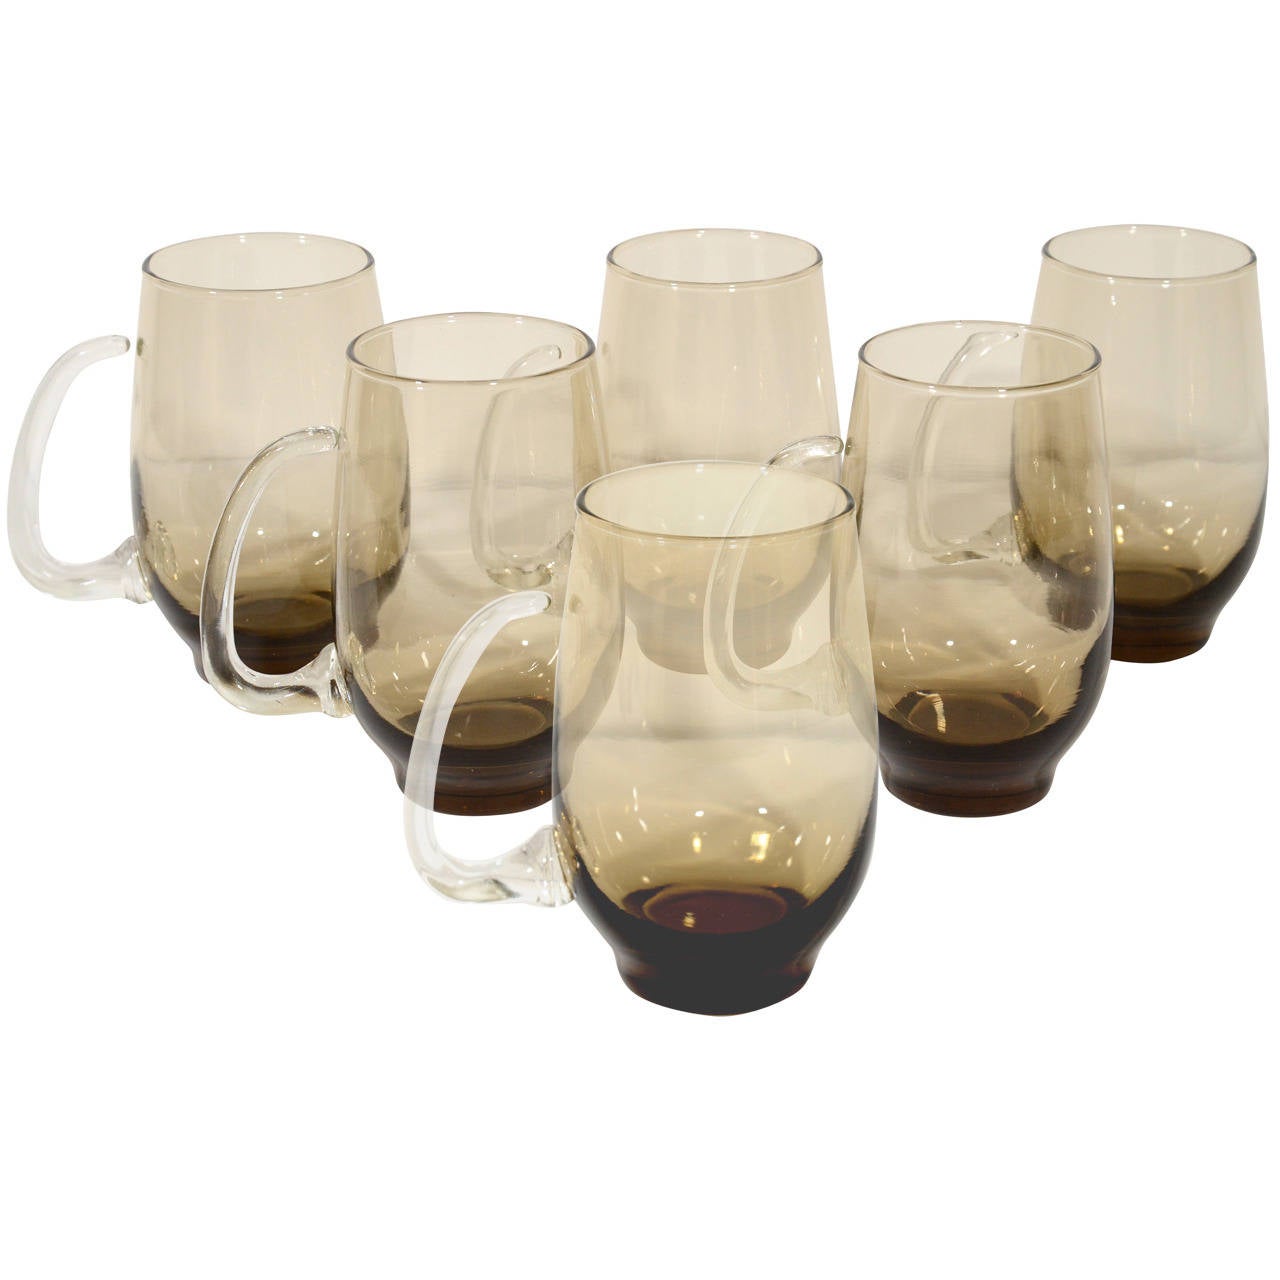 Set of Six Mid-Century Modern Tinted Glass Mugs by Libbey Glass Co. 11